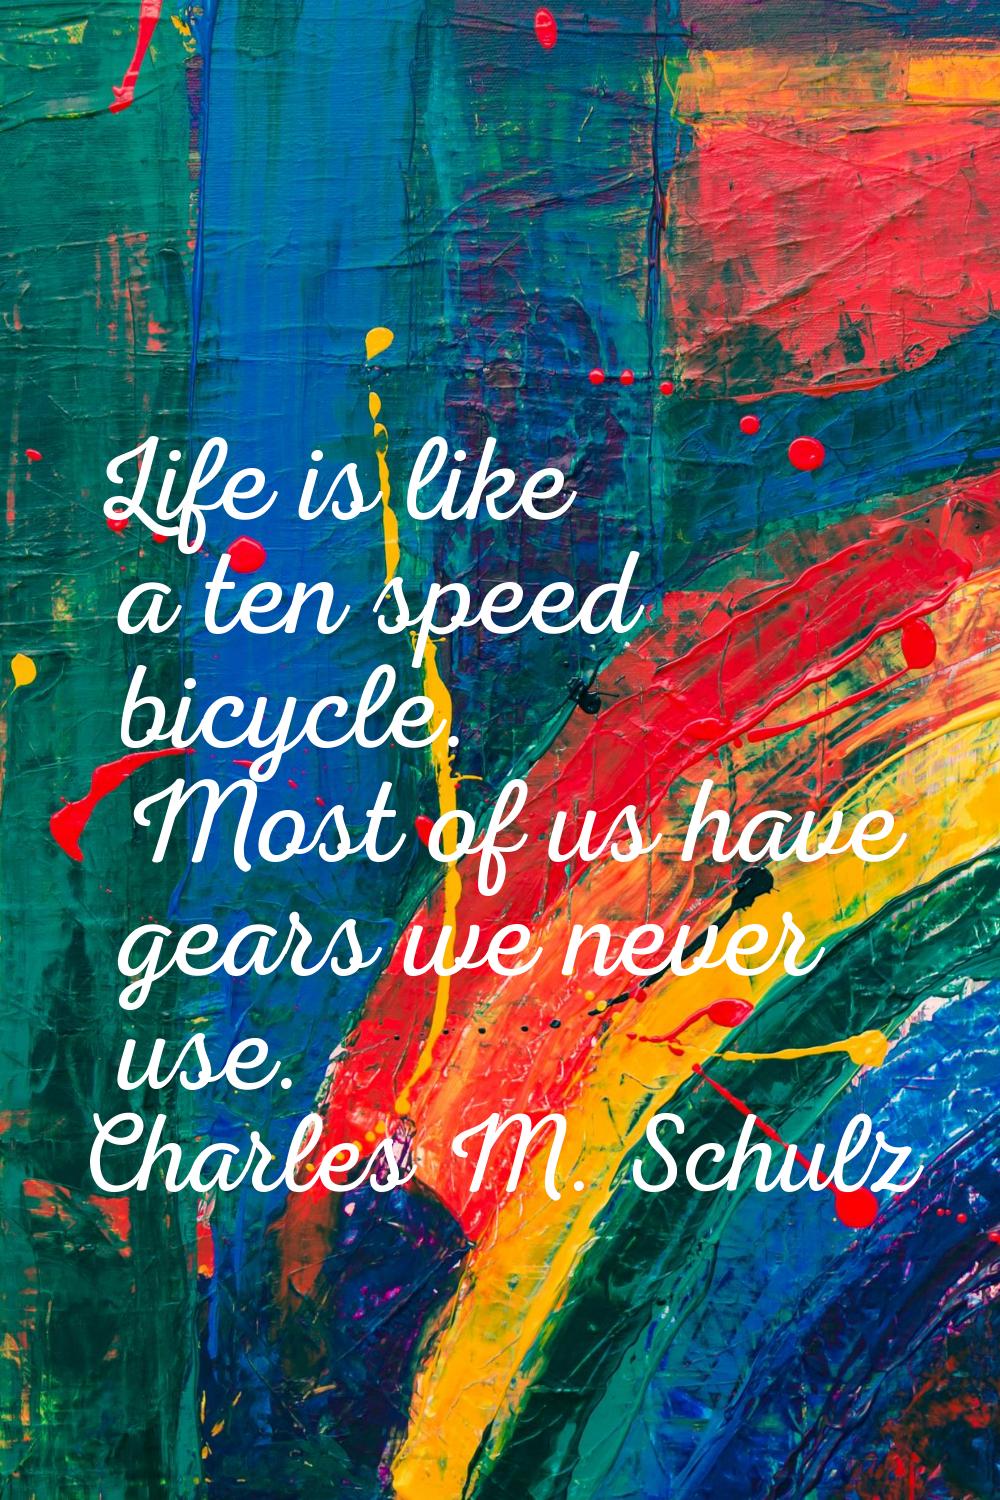 Life is like a ten speed bicycle. Most of us have gears we never use.